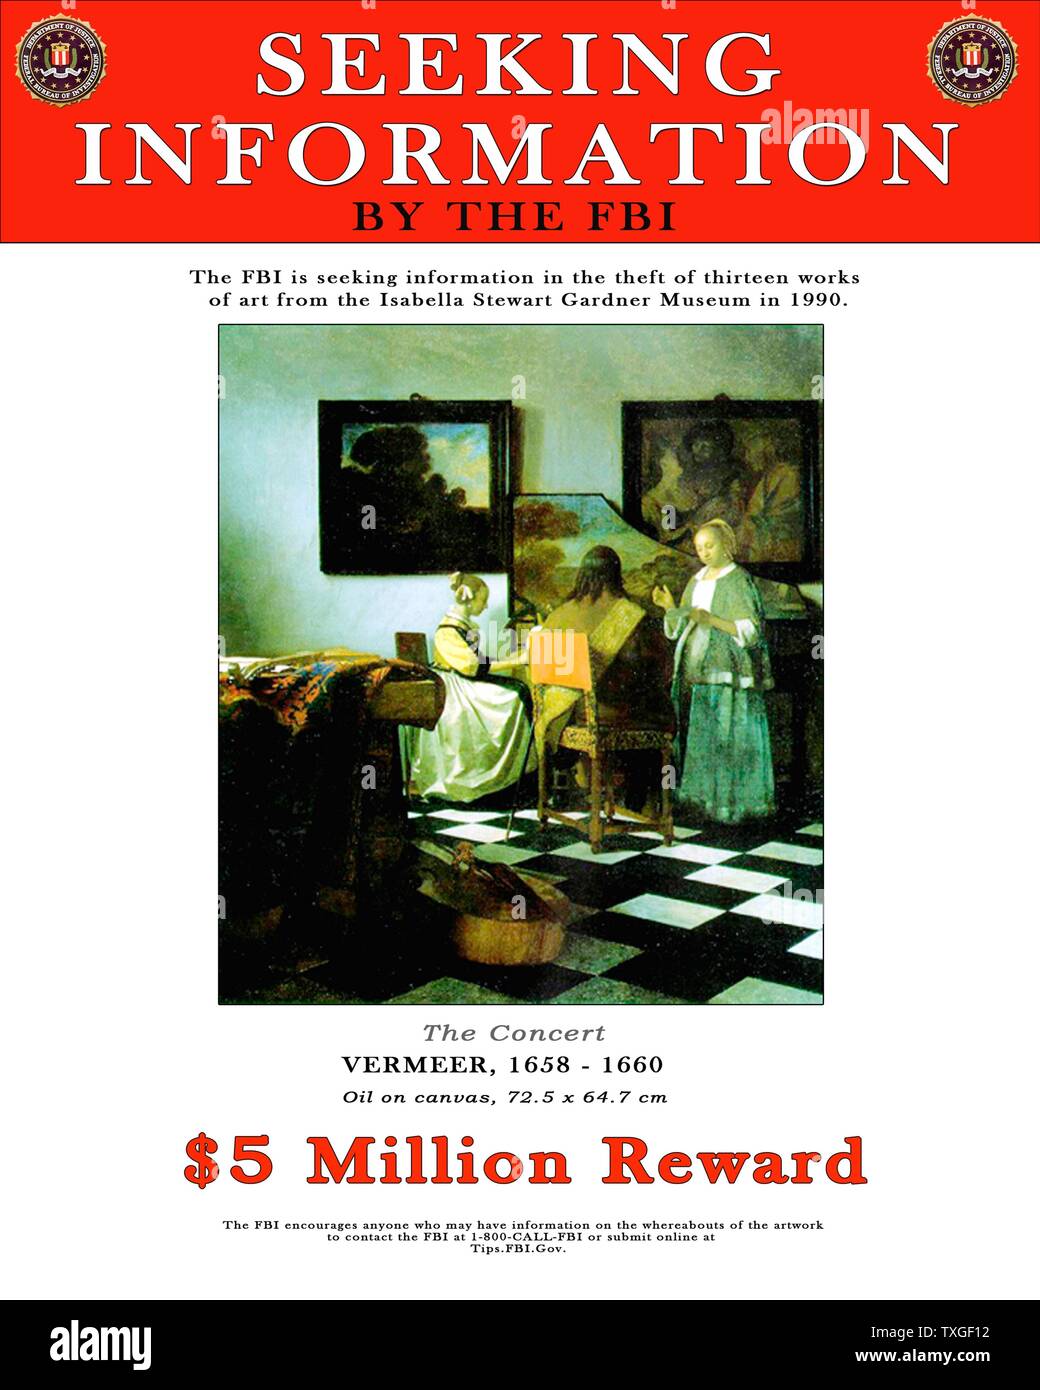 FBI Poster offering a reward for information about an art theft of paintings (including work by Vermeer), from the Isabel Gardiner art museum in 1990. Stock Photo